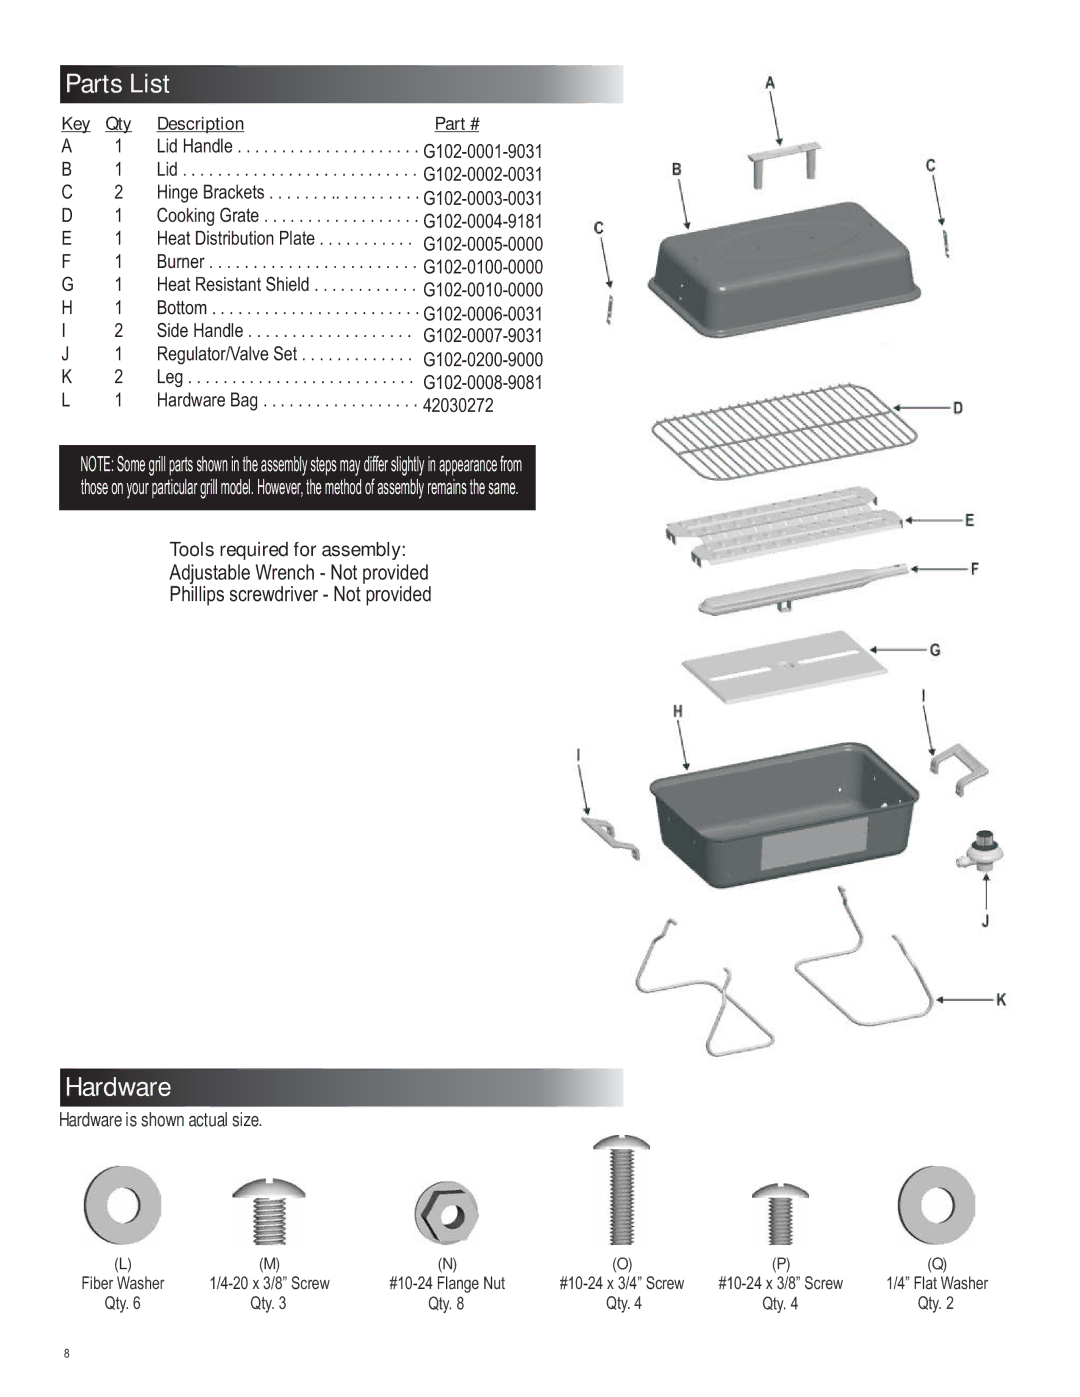 Char-Broil 4651330 manual Parts List, Tools required for assembly 